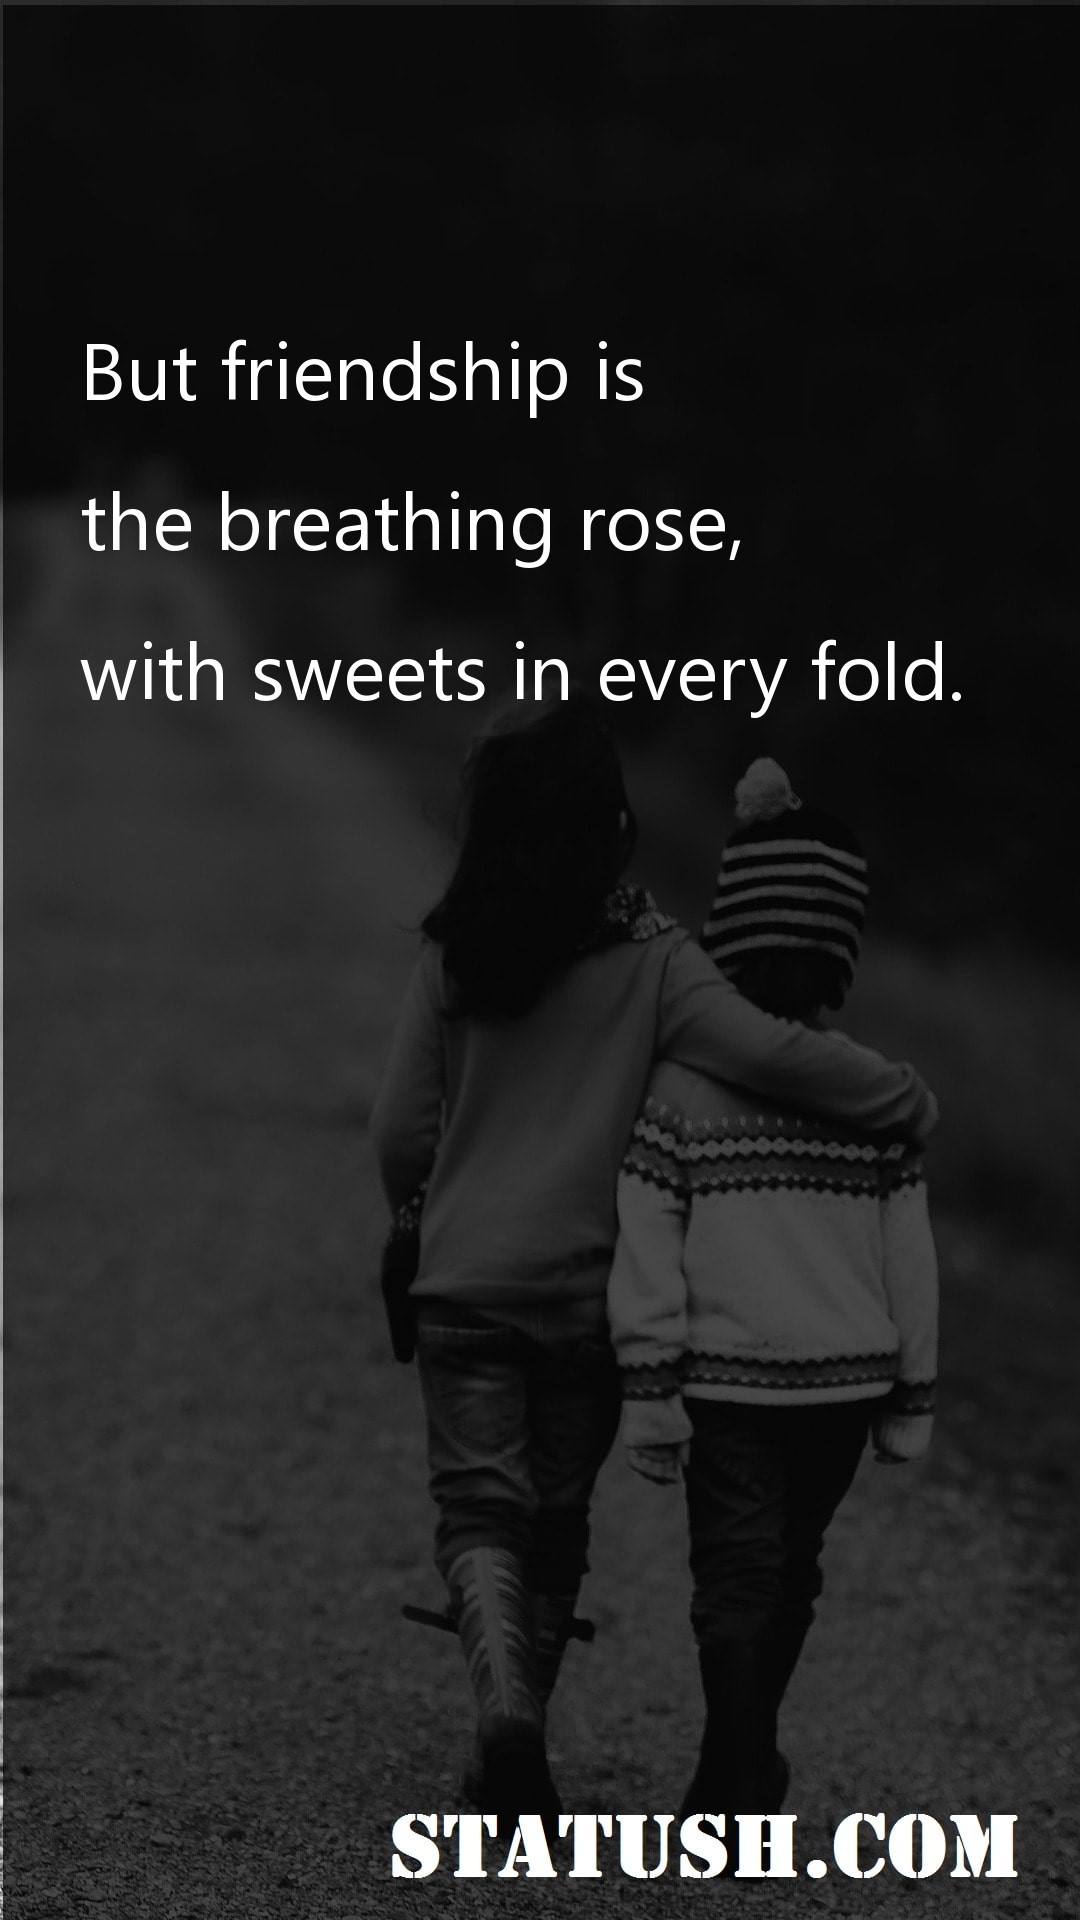 But friendship is the breathing rose